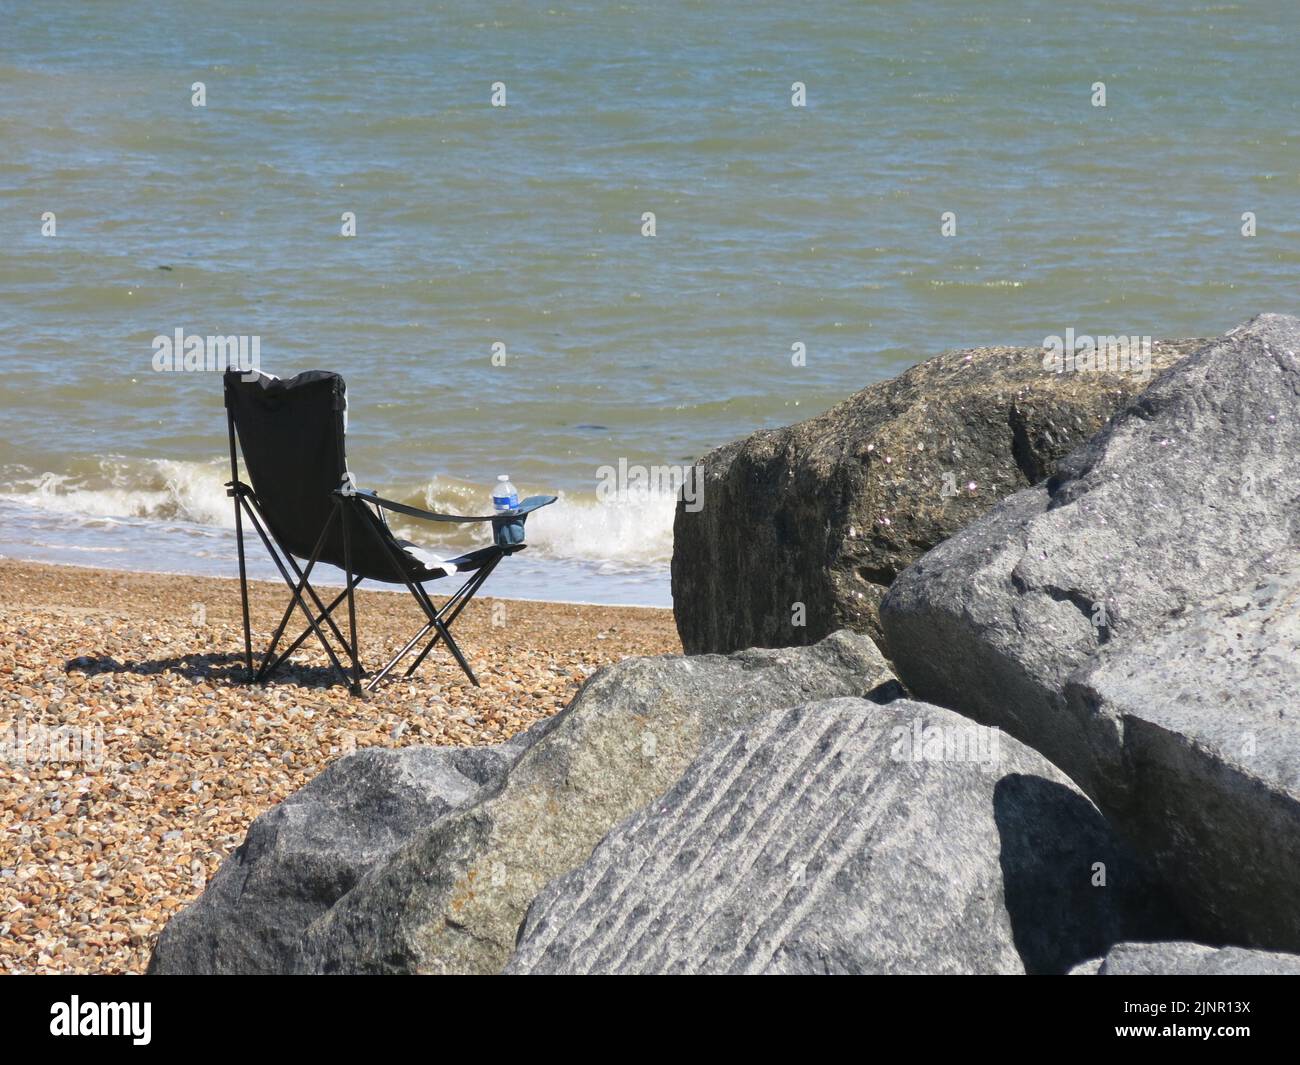 The perfect spot: a single folding camping chair on the sand facing the gently lapping waves of the sea with nearby rocks; the beach at Felixstowe. Stock Photo